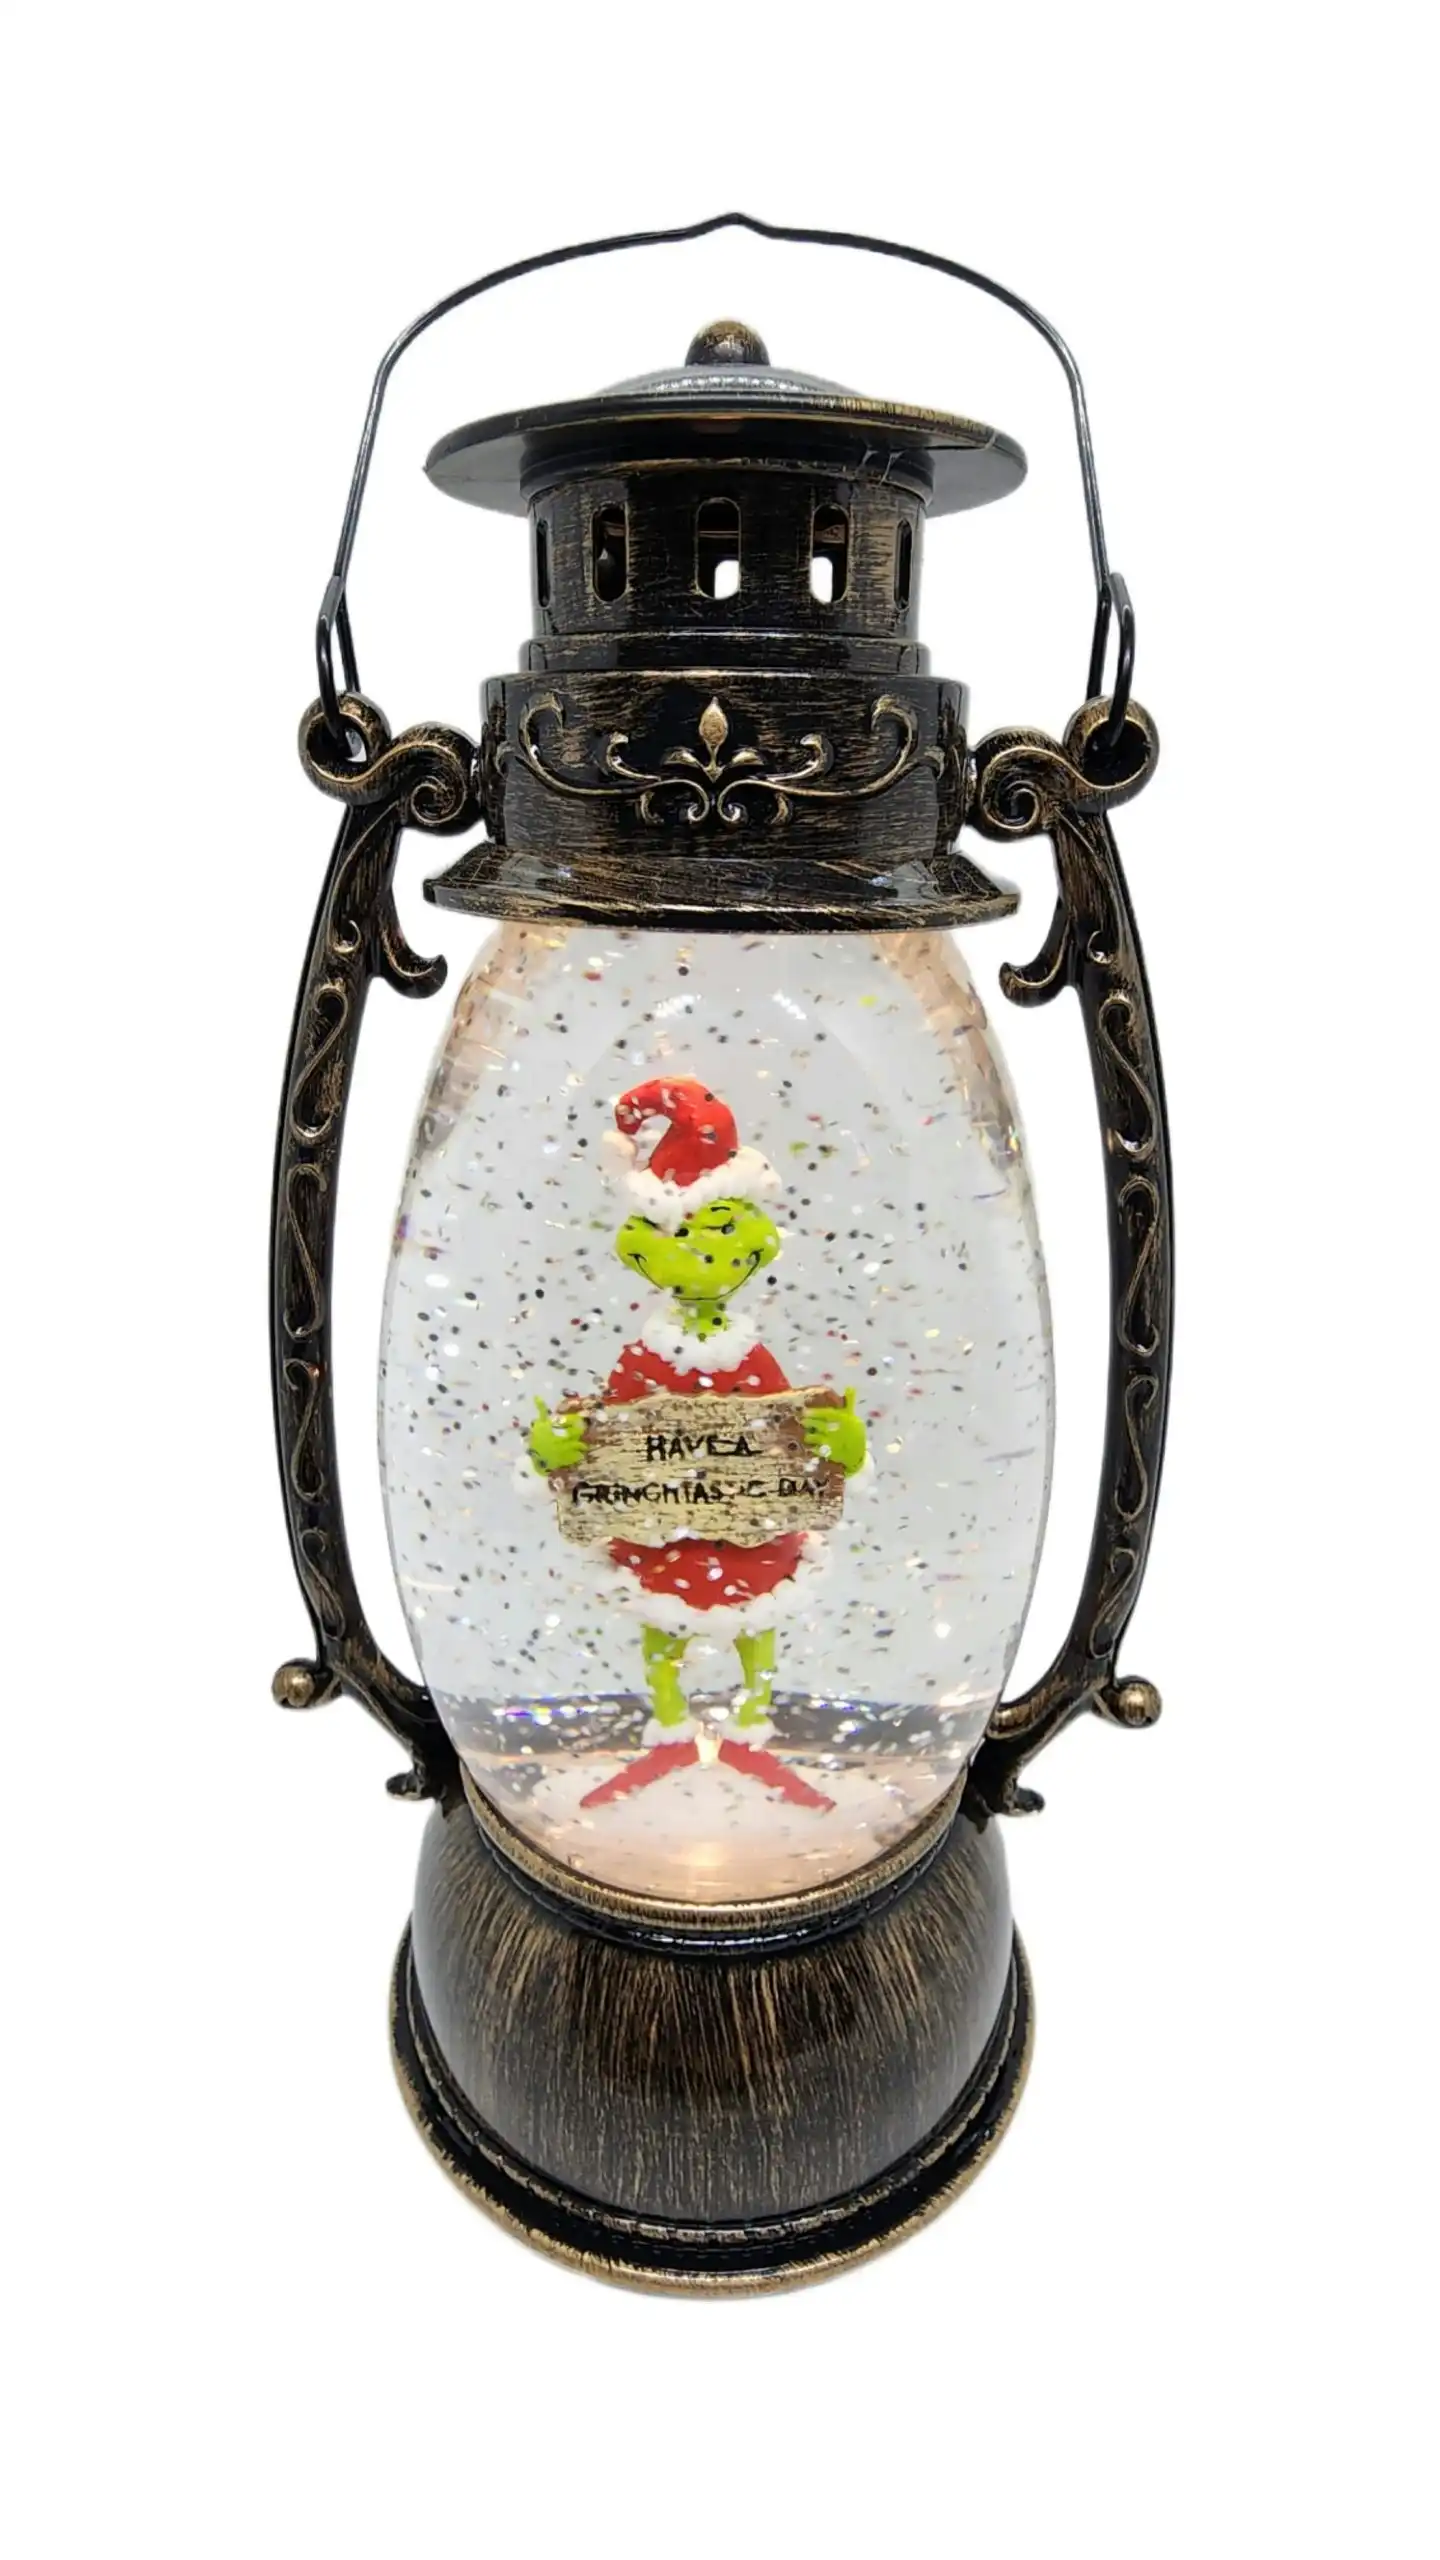 Cotton Candy - Xmas Dr. Seuss Grinch ‘ Have A Grinchtastic Day ’ Brass Lantern